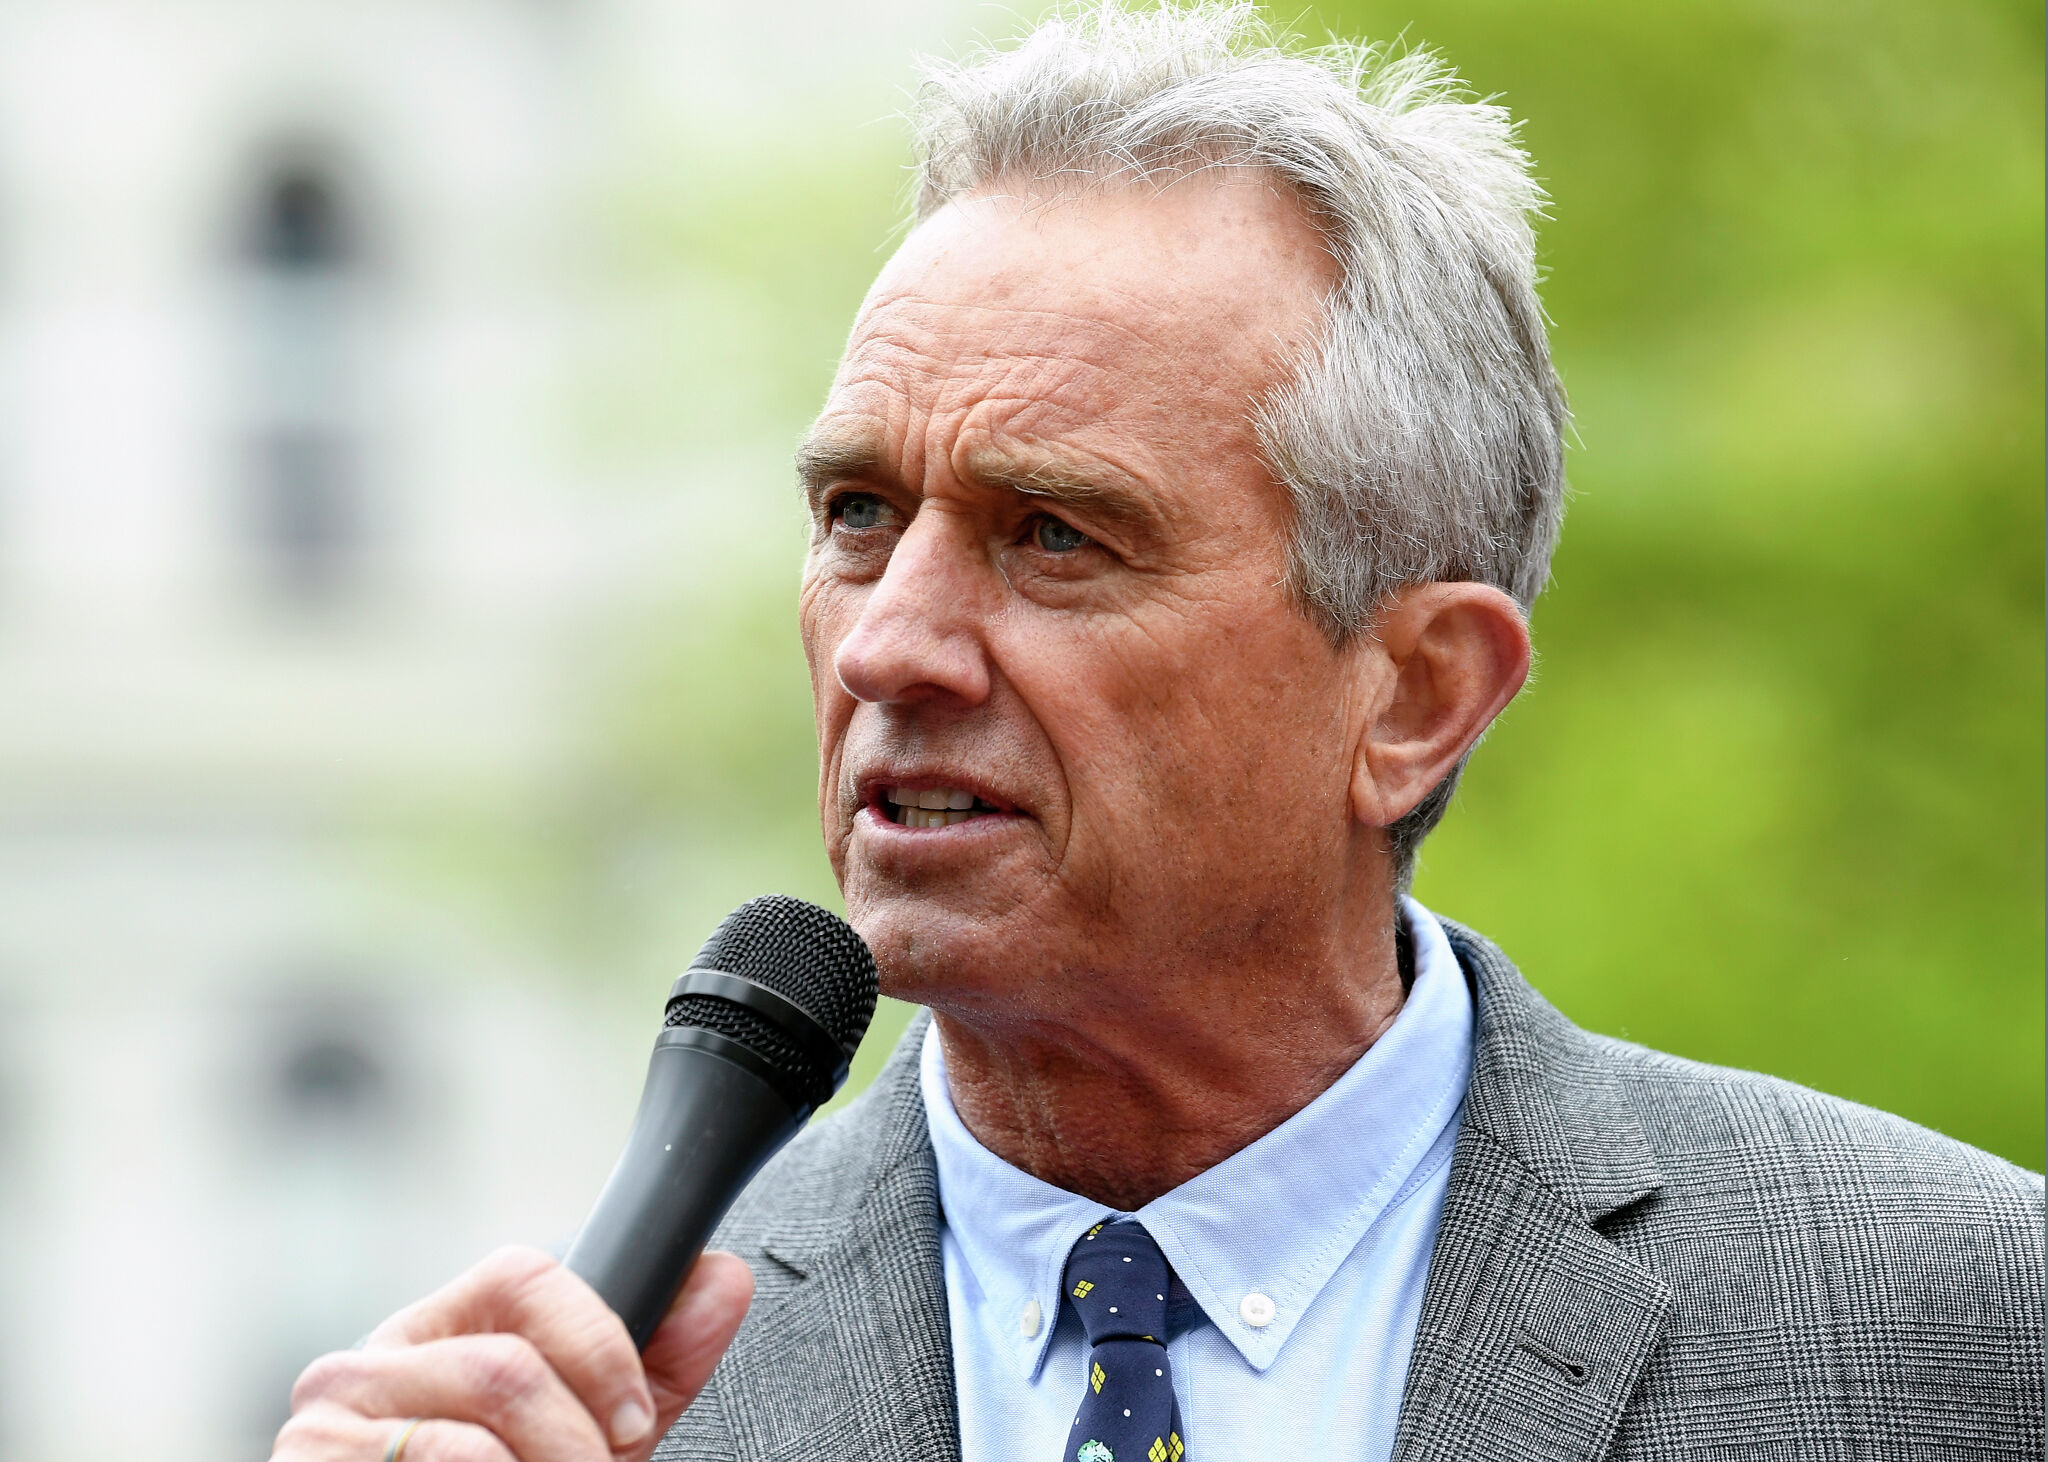 Robert F. Kennedy Jr.’s presidential campaign is a climate disaster